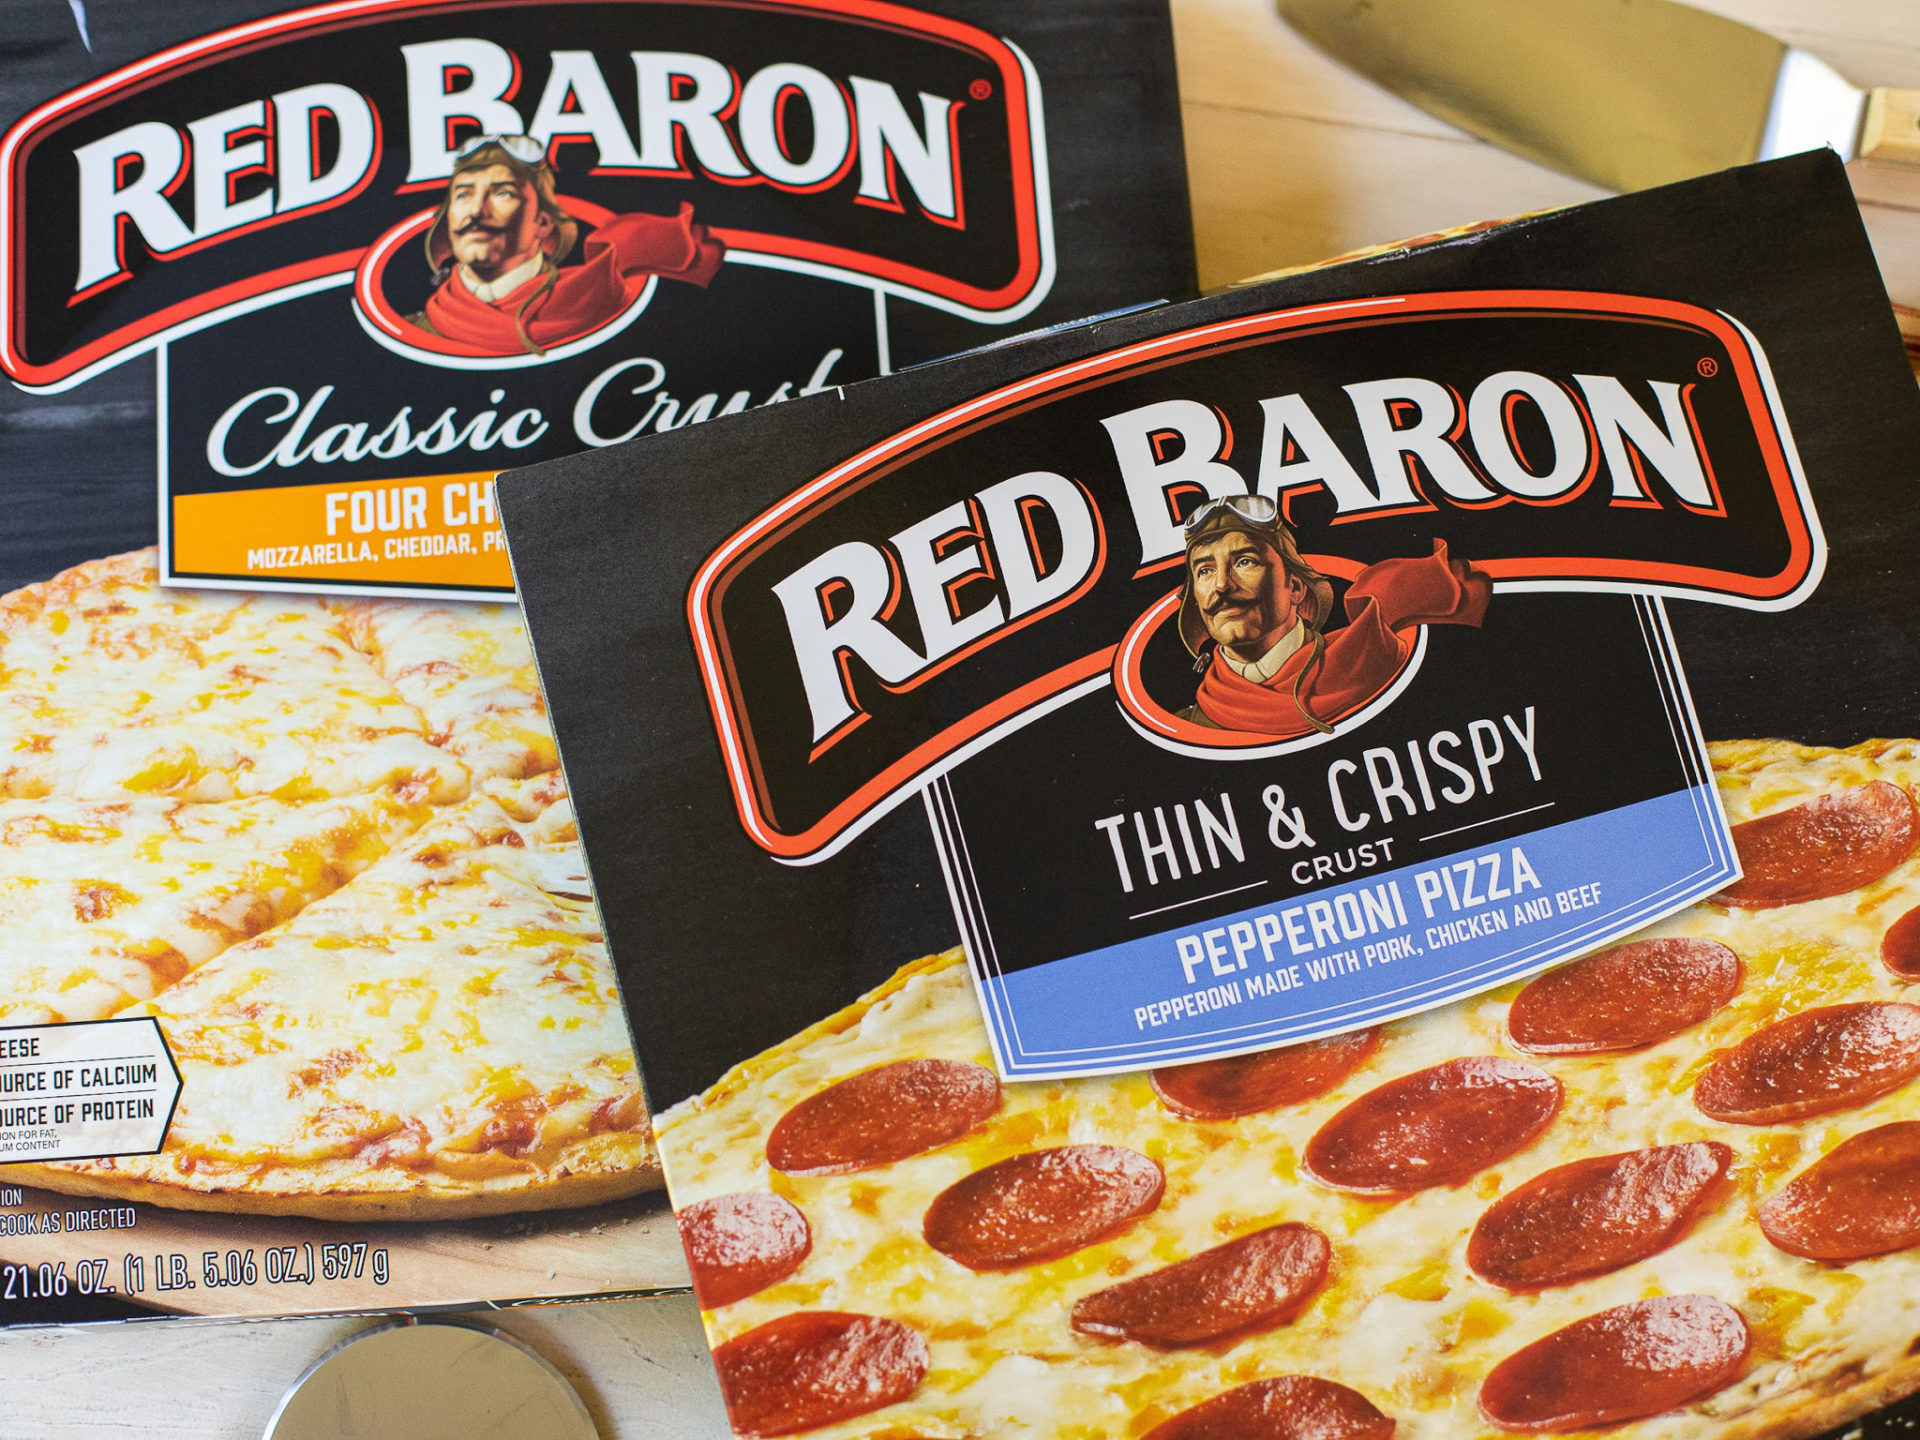 Red Baron Pizza Just $3.49 At Kroger